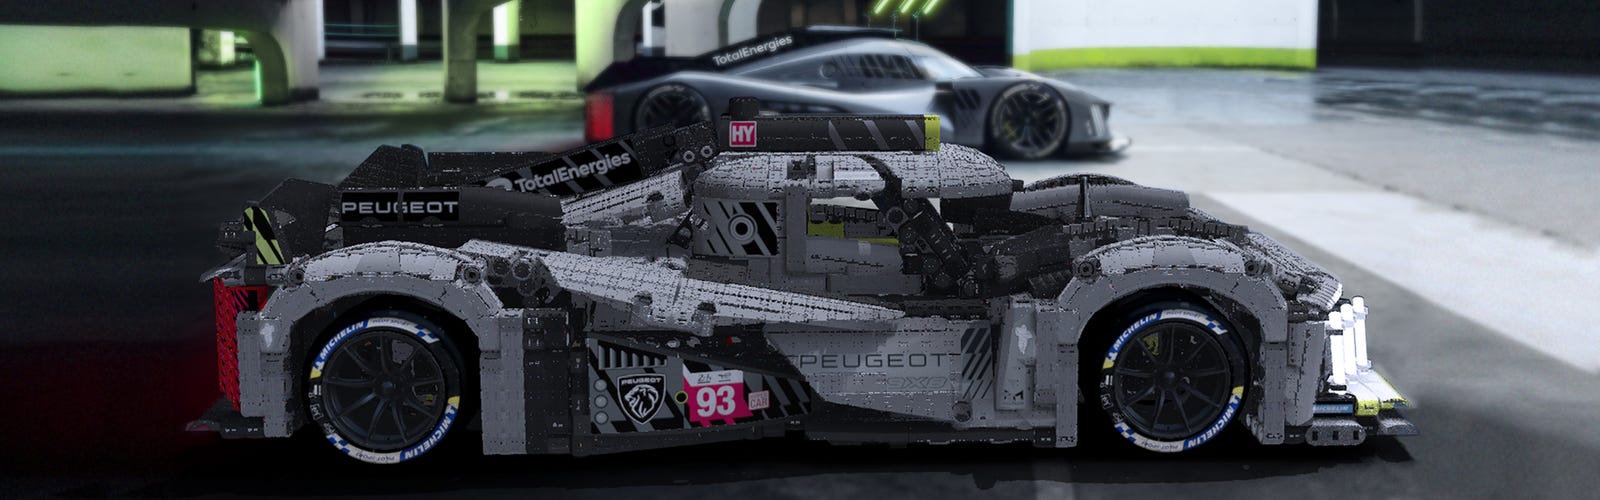 Scaling up a Le Mans Hypercar with LEGO® elements | LEGO® Shop